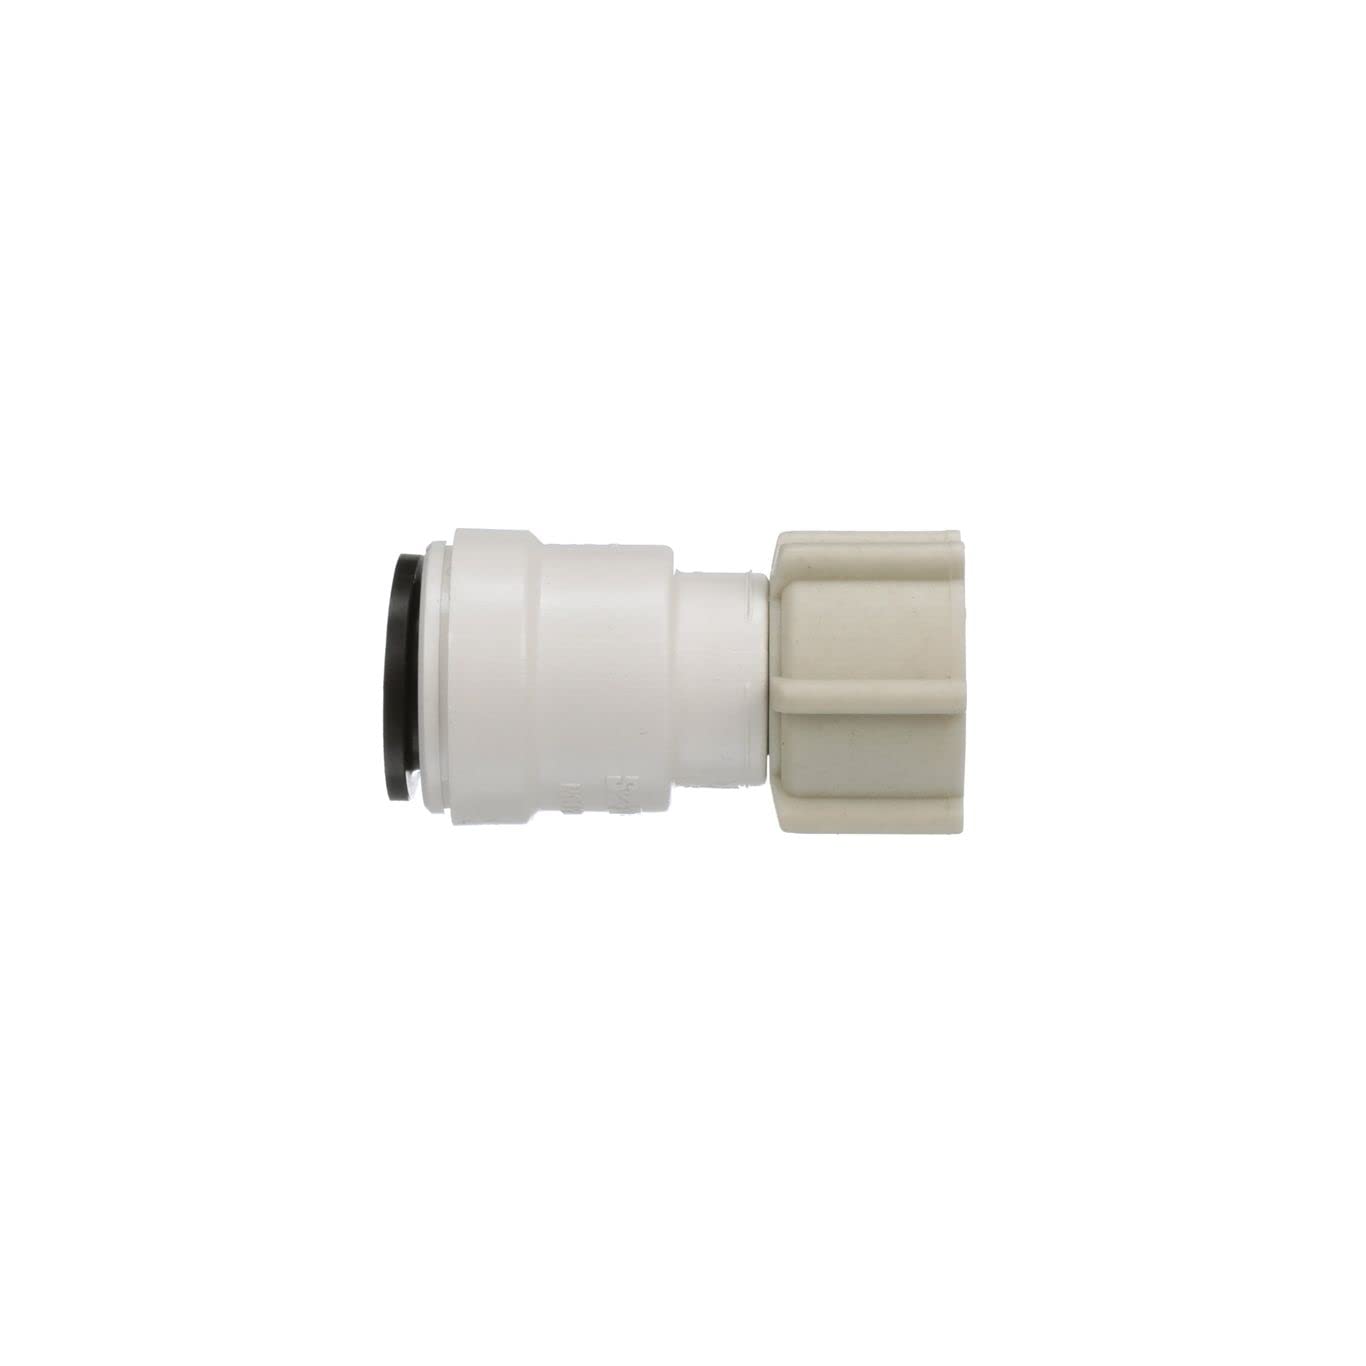 FEMALE SWIVEL CONNECTOR 3/8 CTS X 1/2 NPS